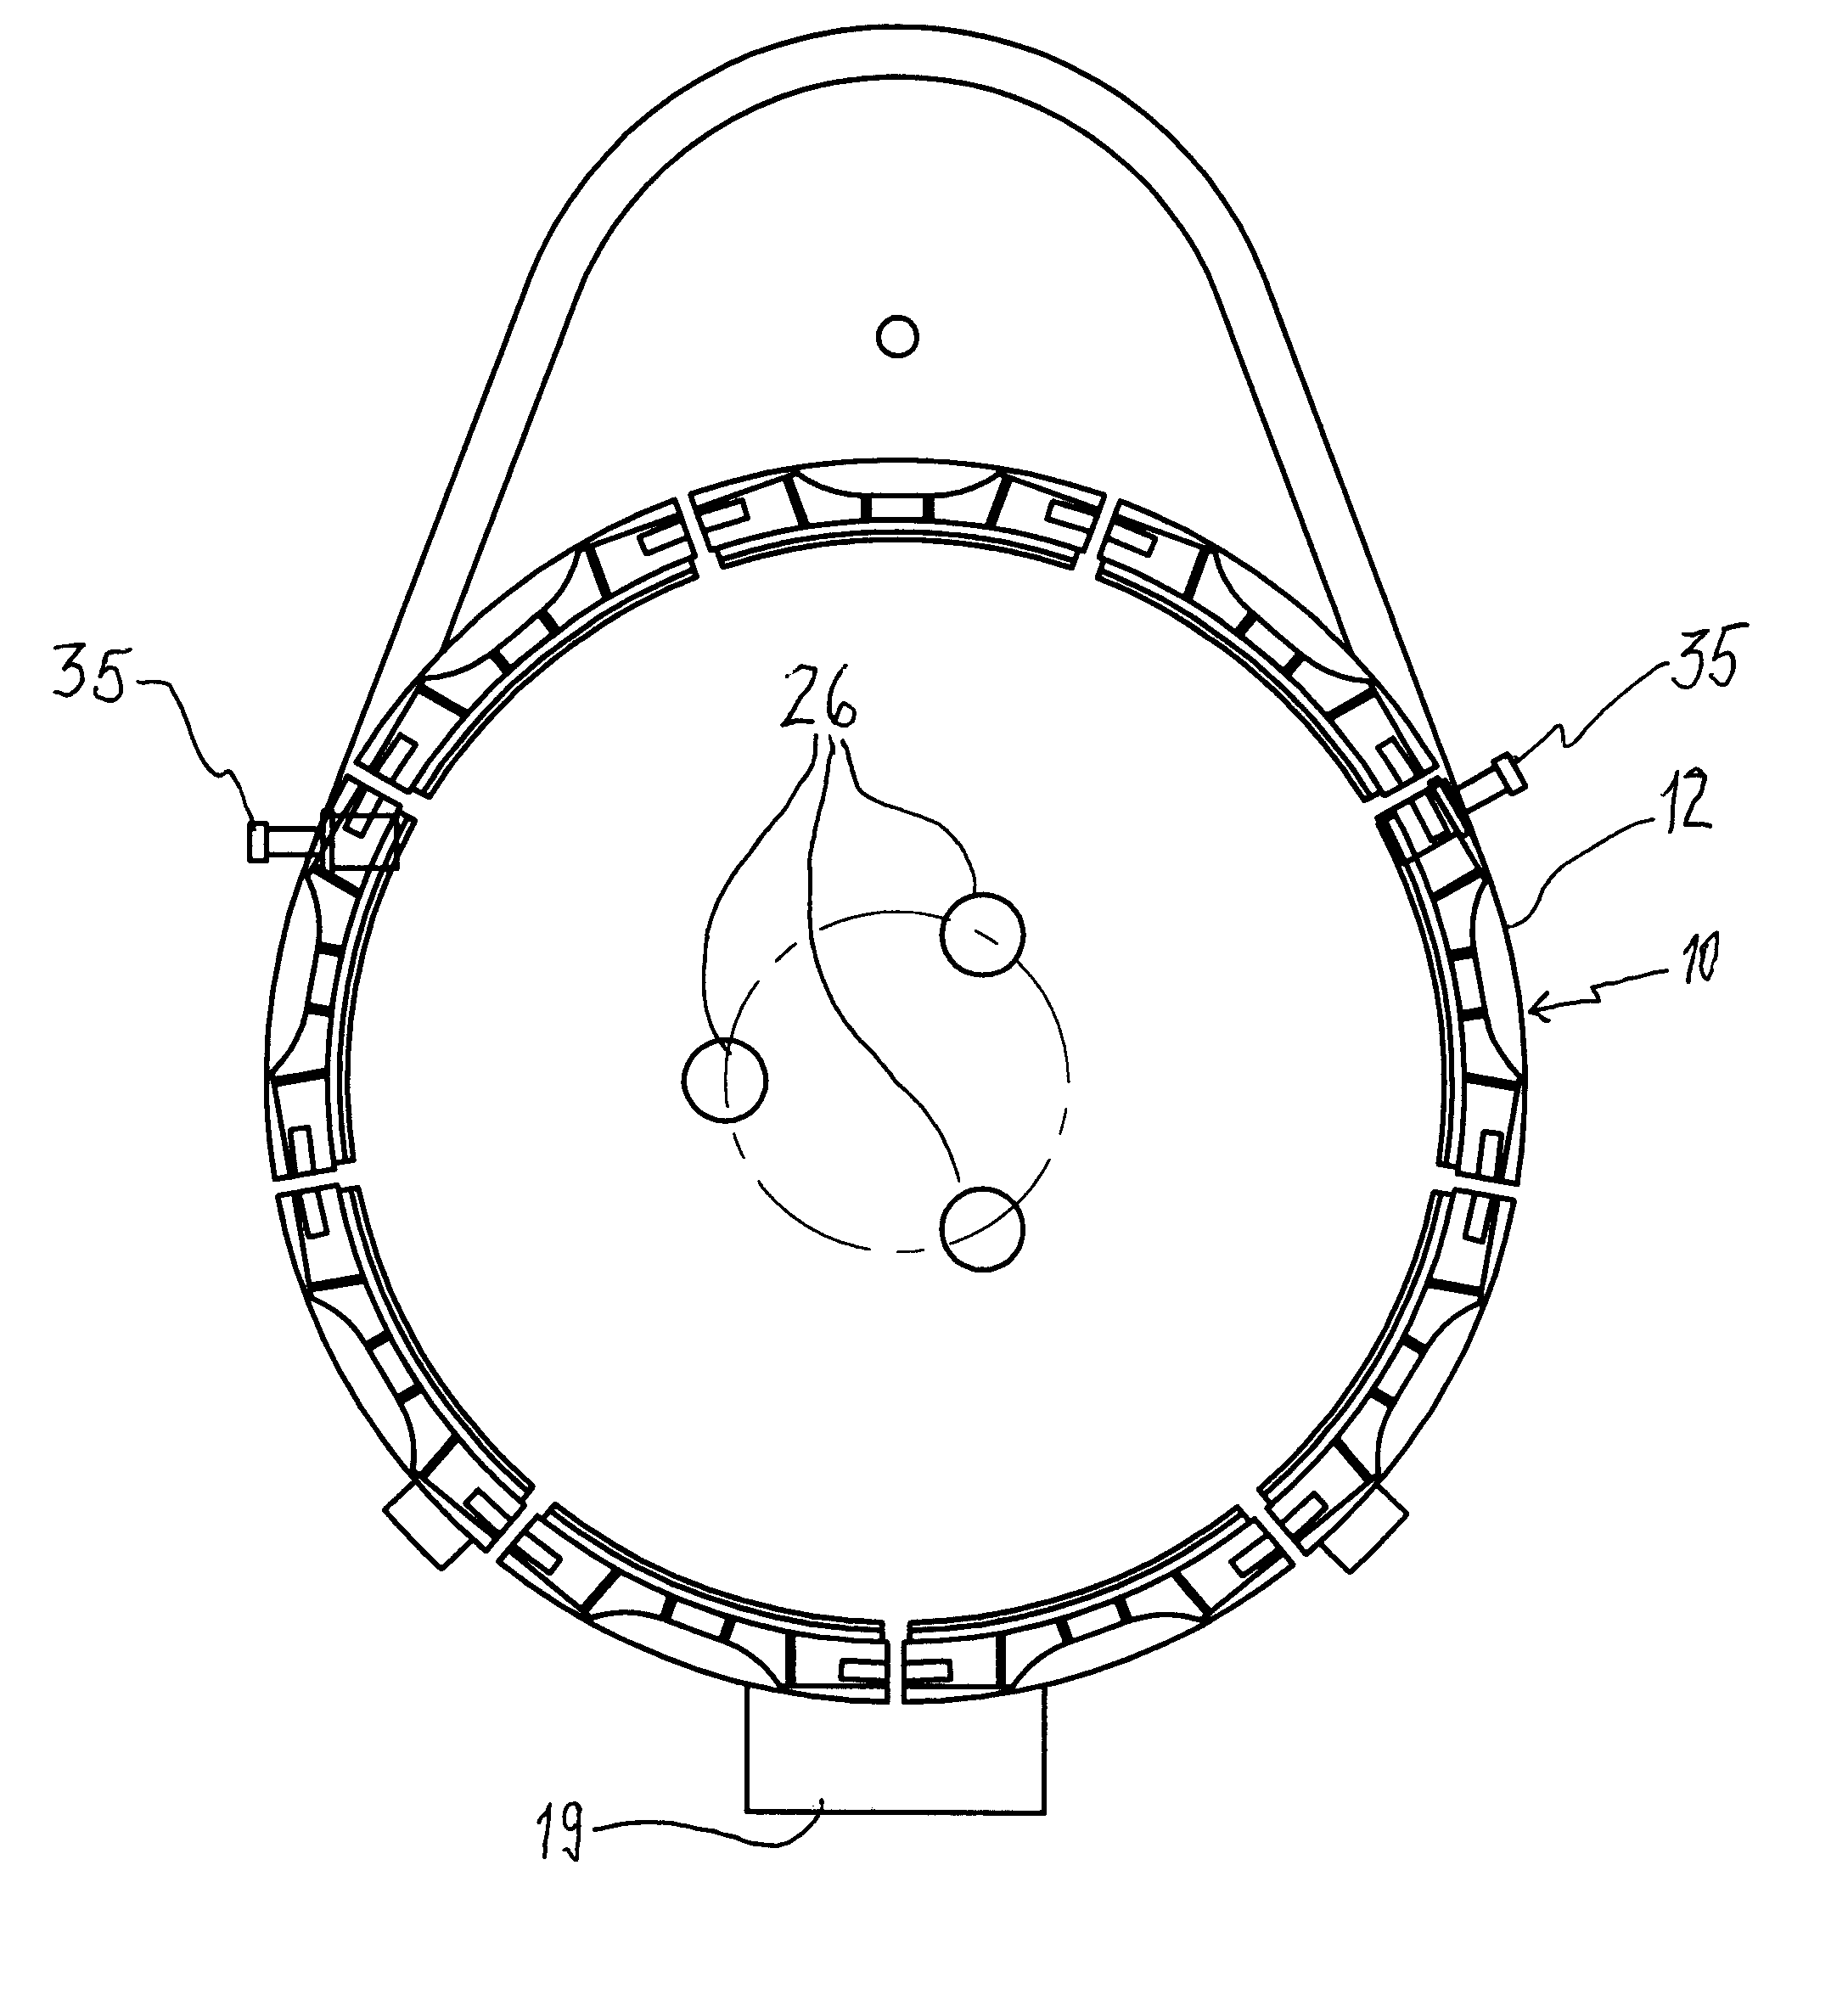 Method for making steel with electric arc furnace